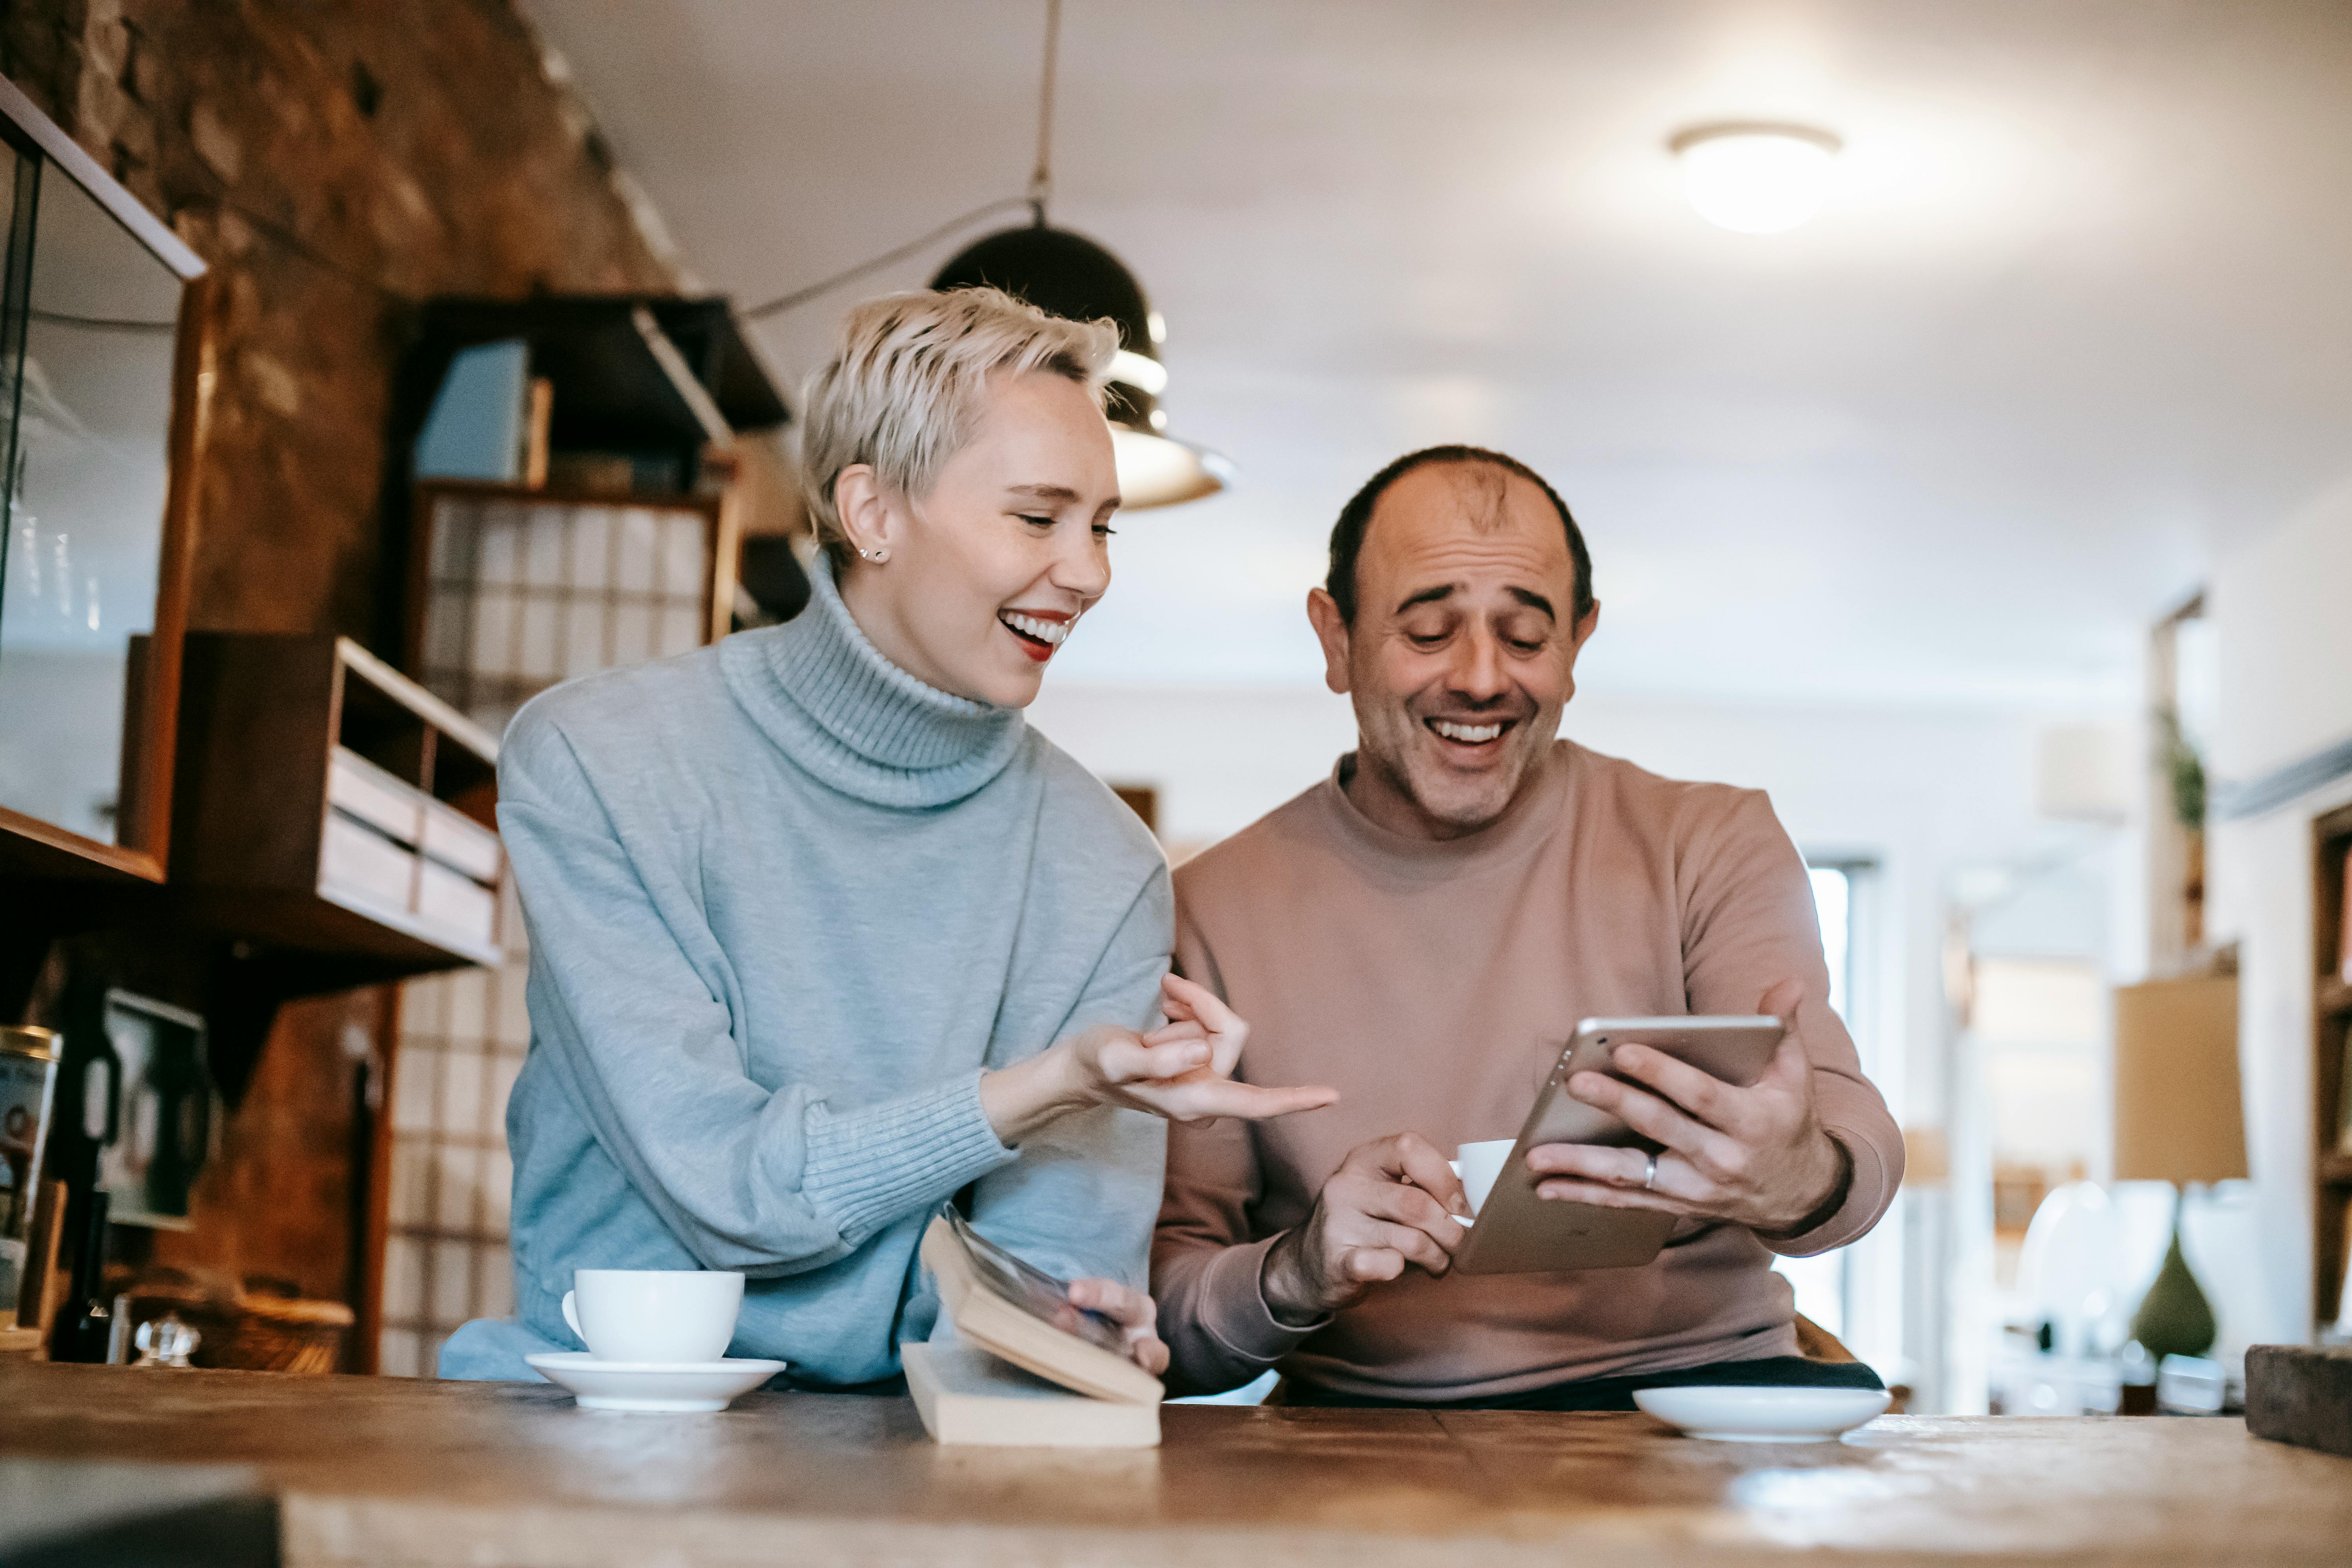 Middle-aged couple has breakfast | Source: Pexels